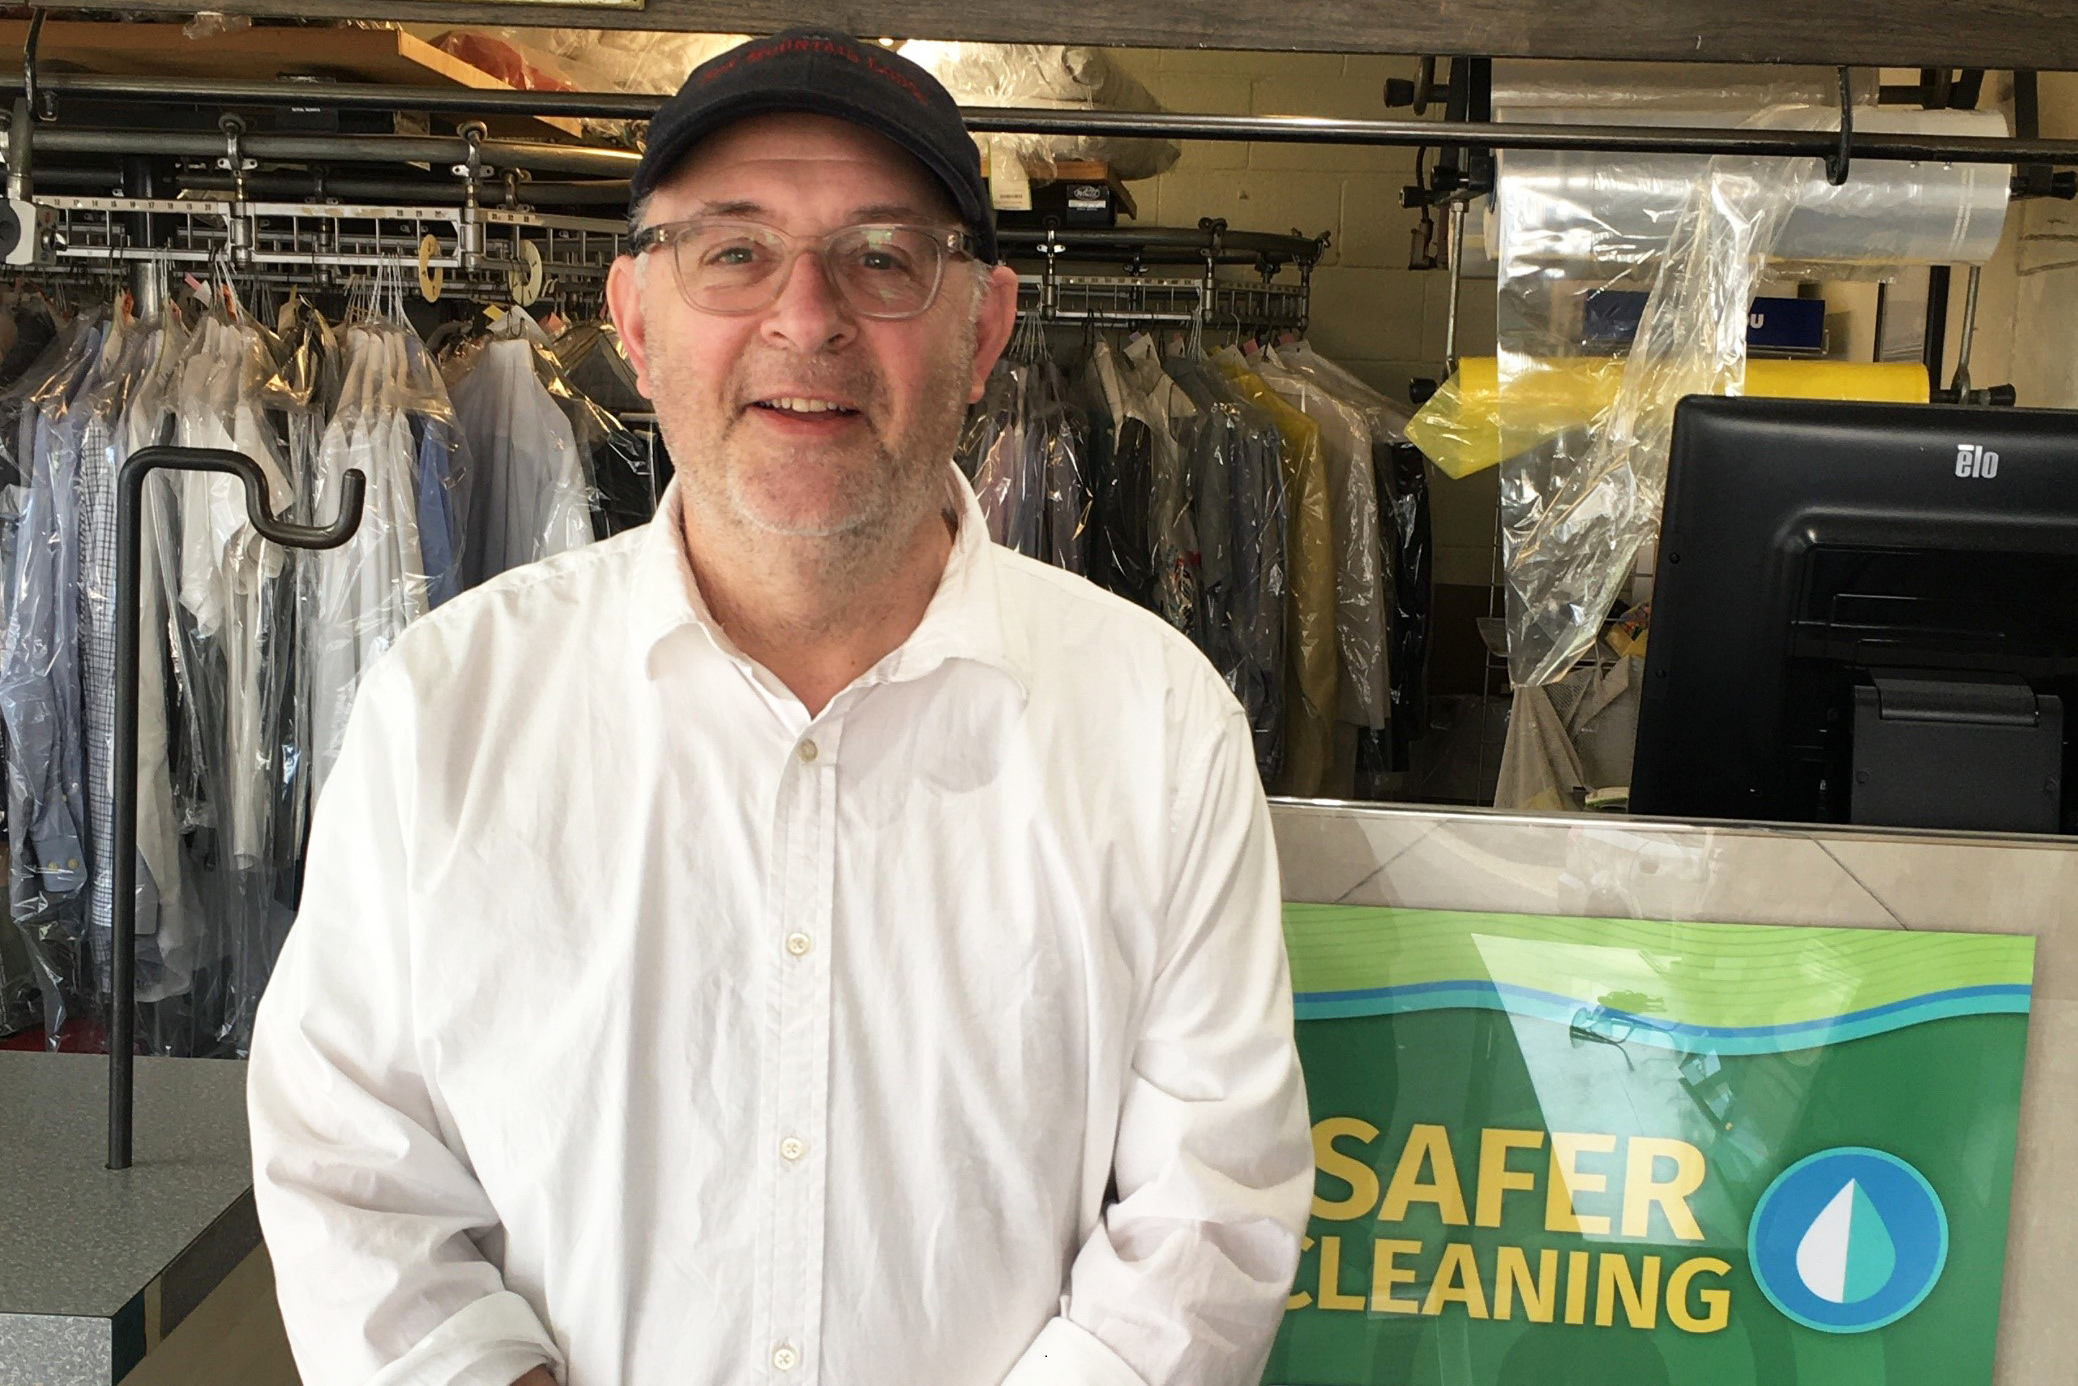 Man wearing dark hat and white shirt stands in a dry cleaning shop